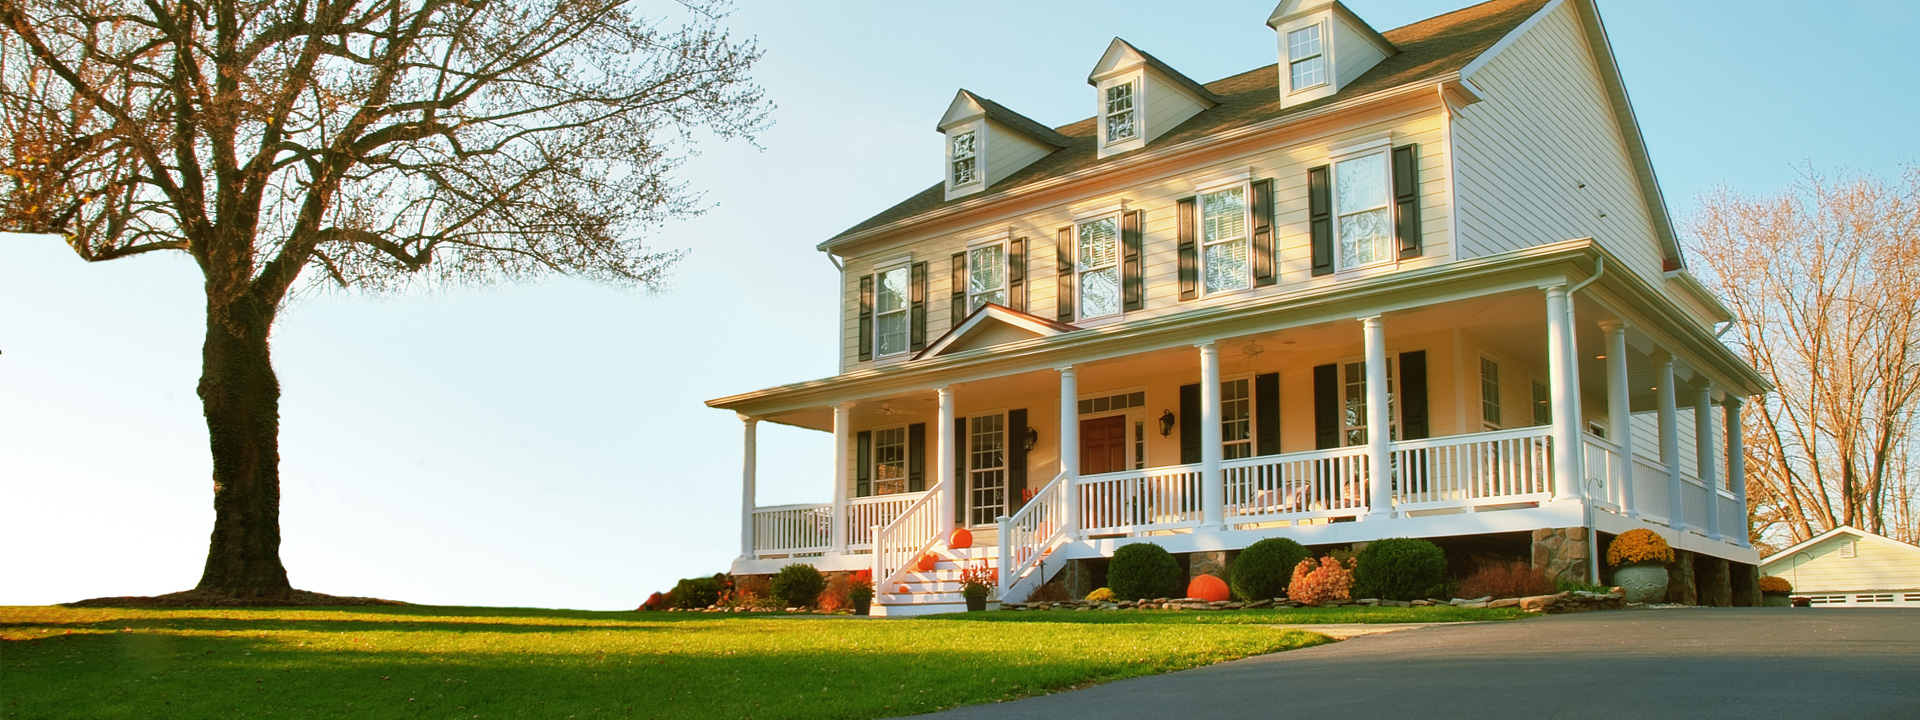 Buying a home in Clarksville TN